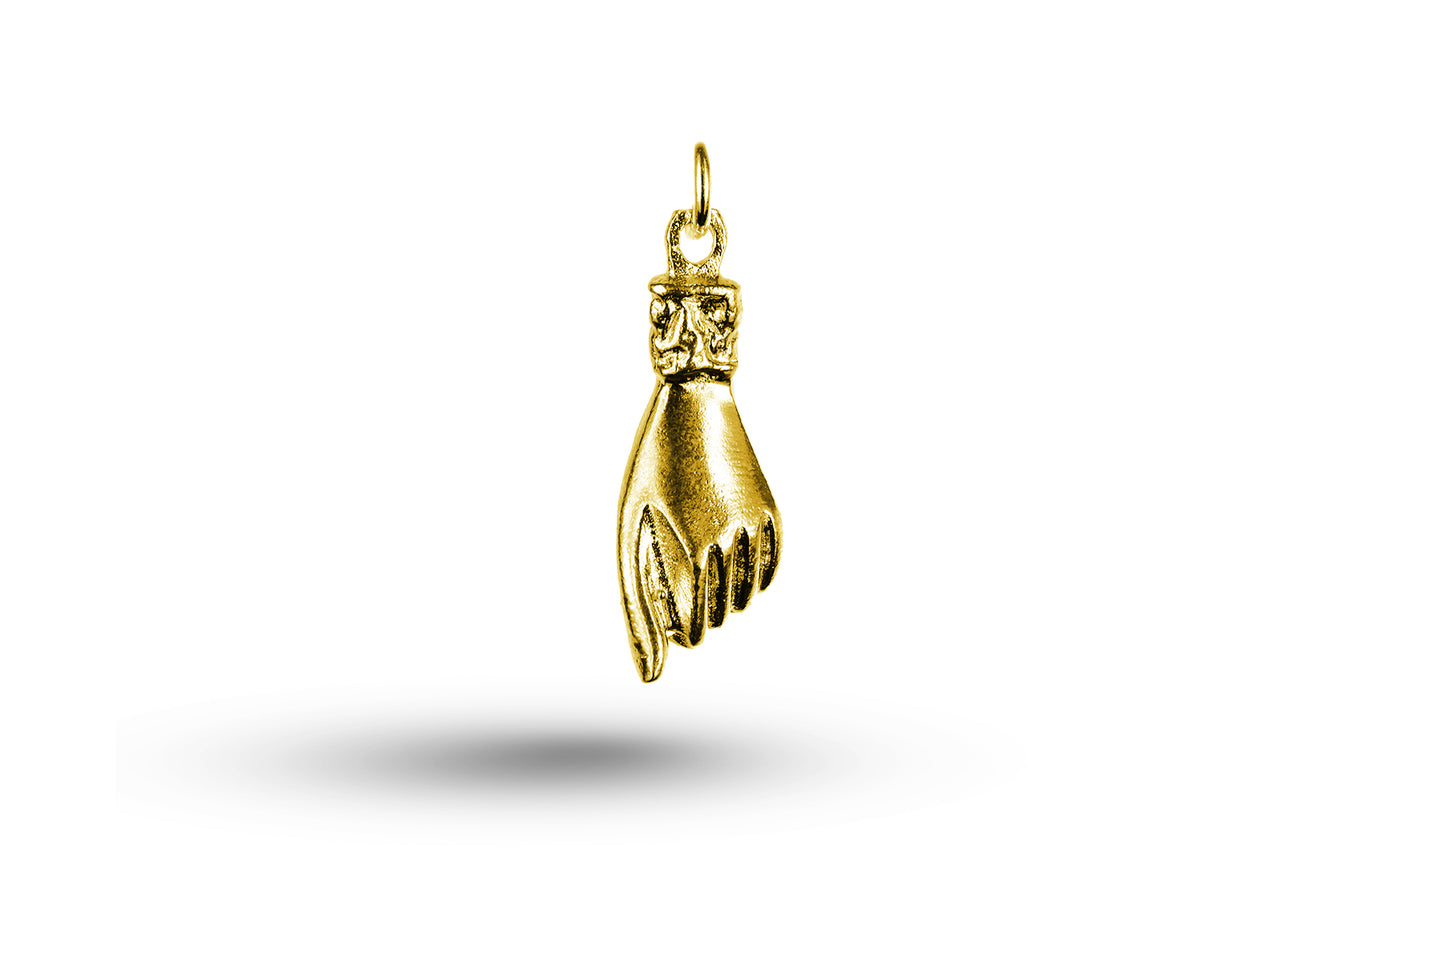 Yellow gold Hand Holding Heart charm.